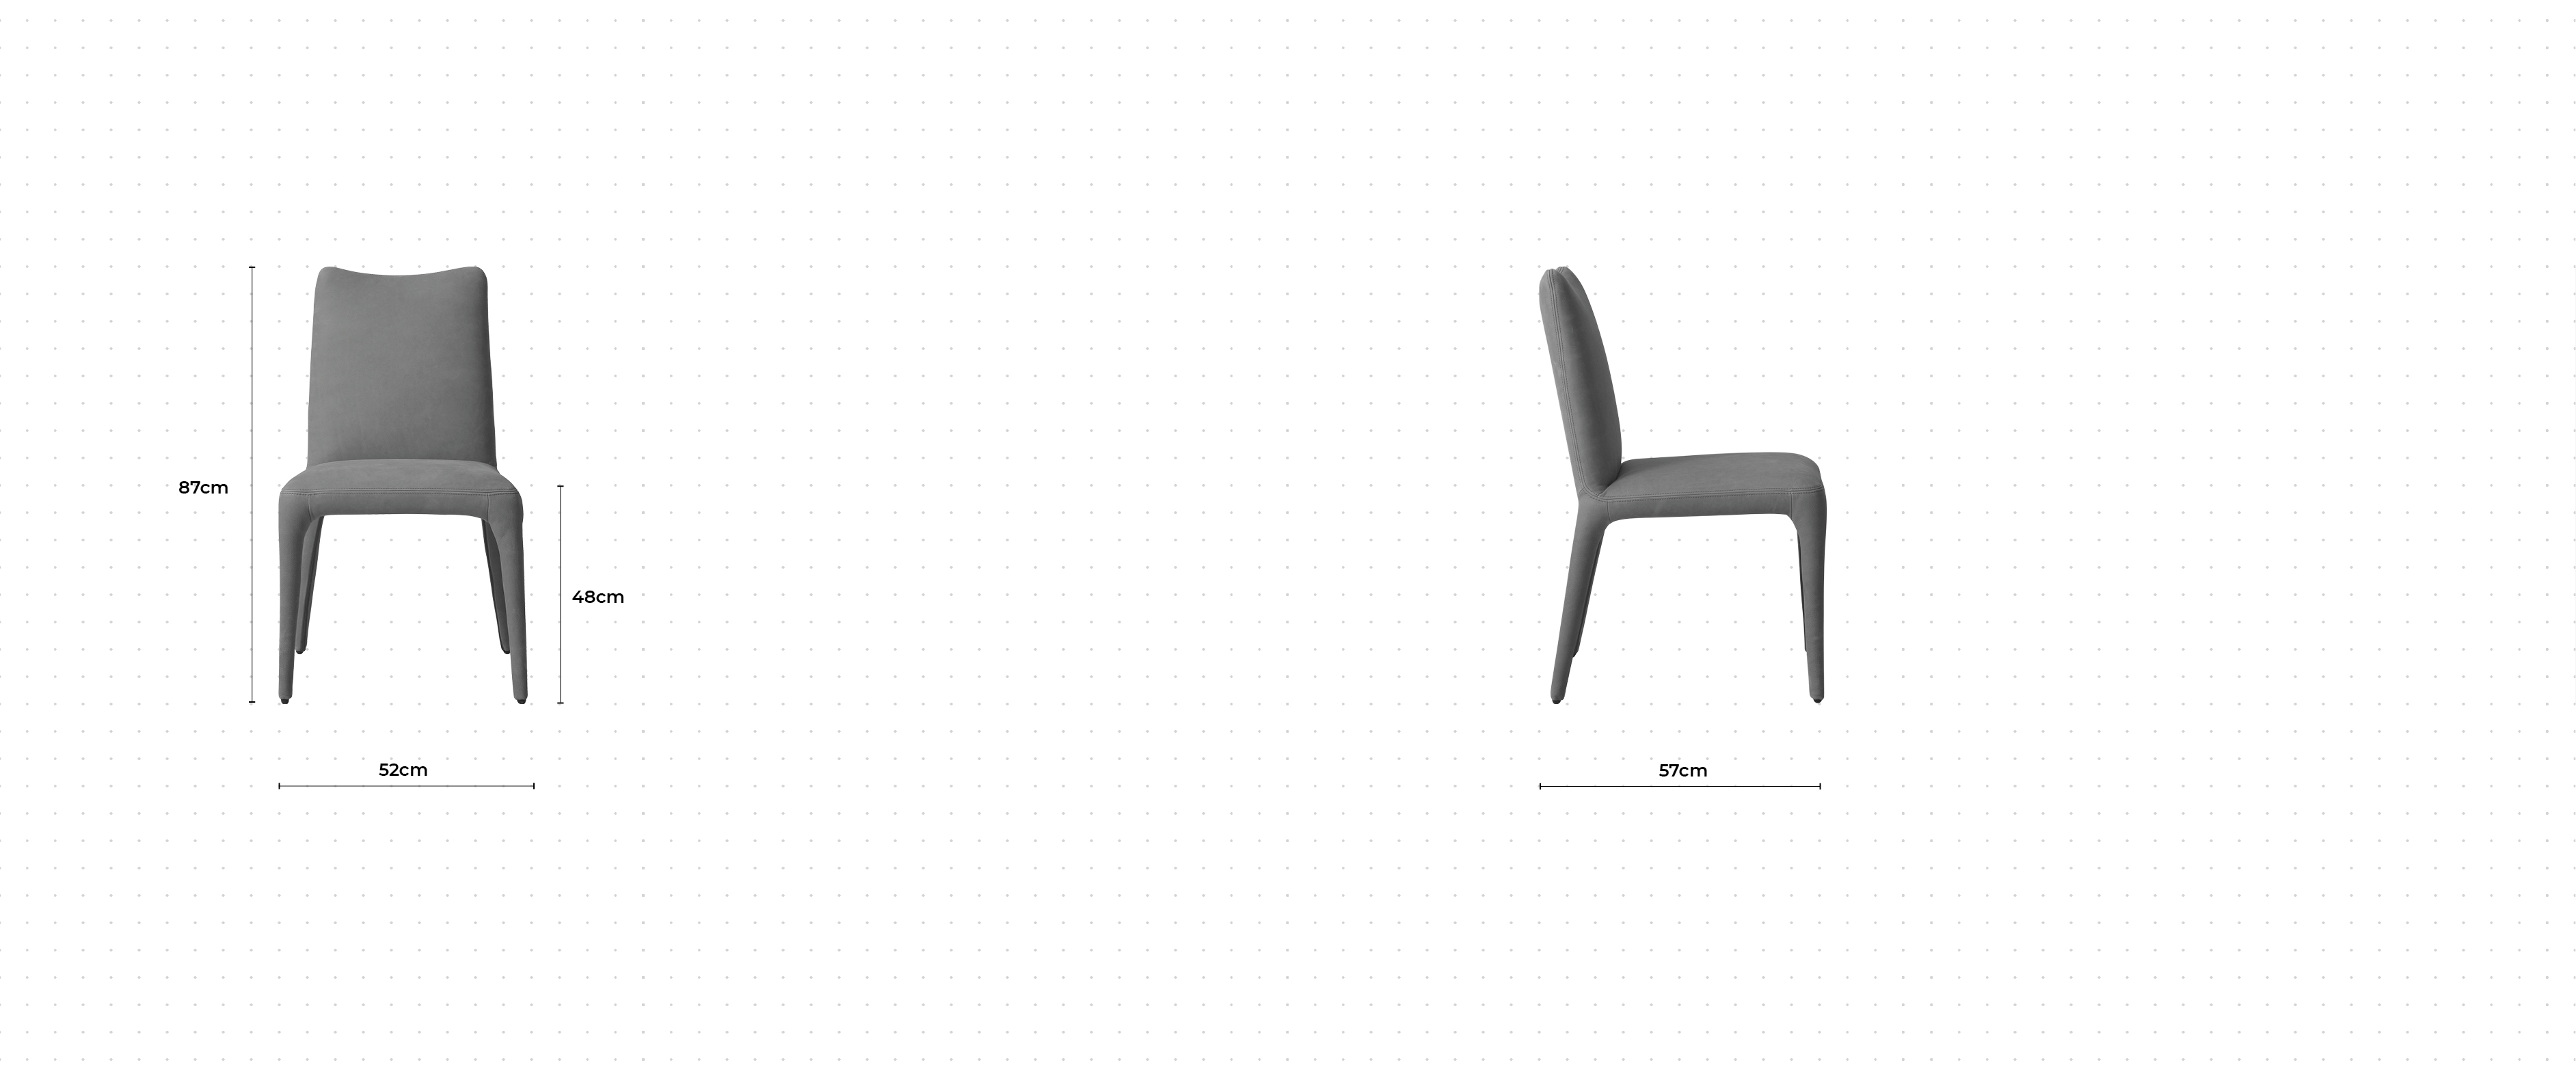 Monza Slim Dining Chair dimensions